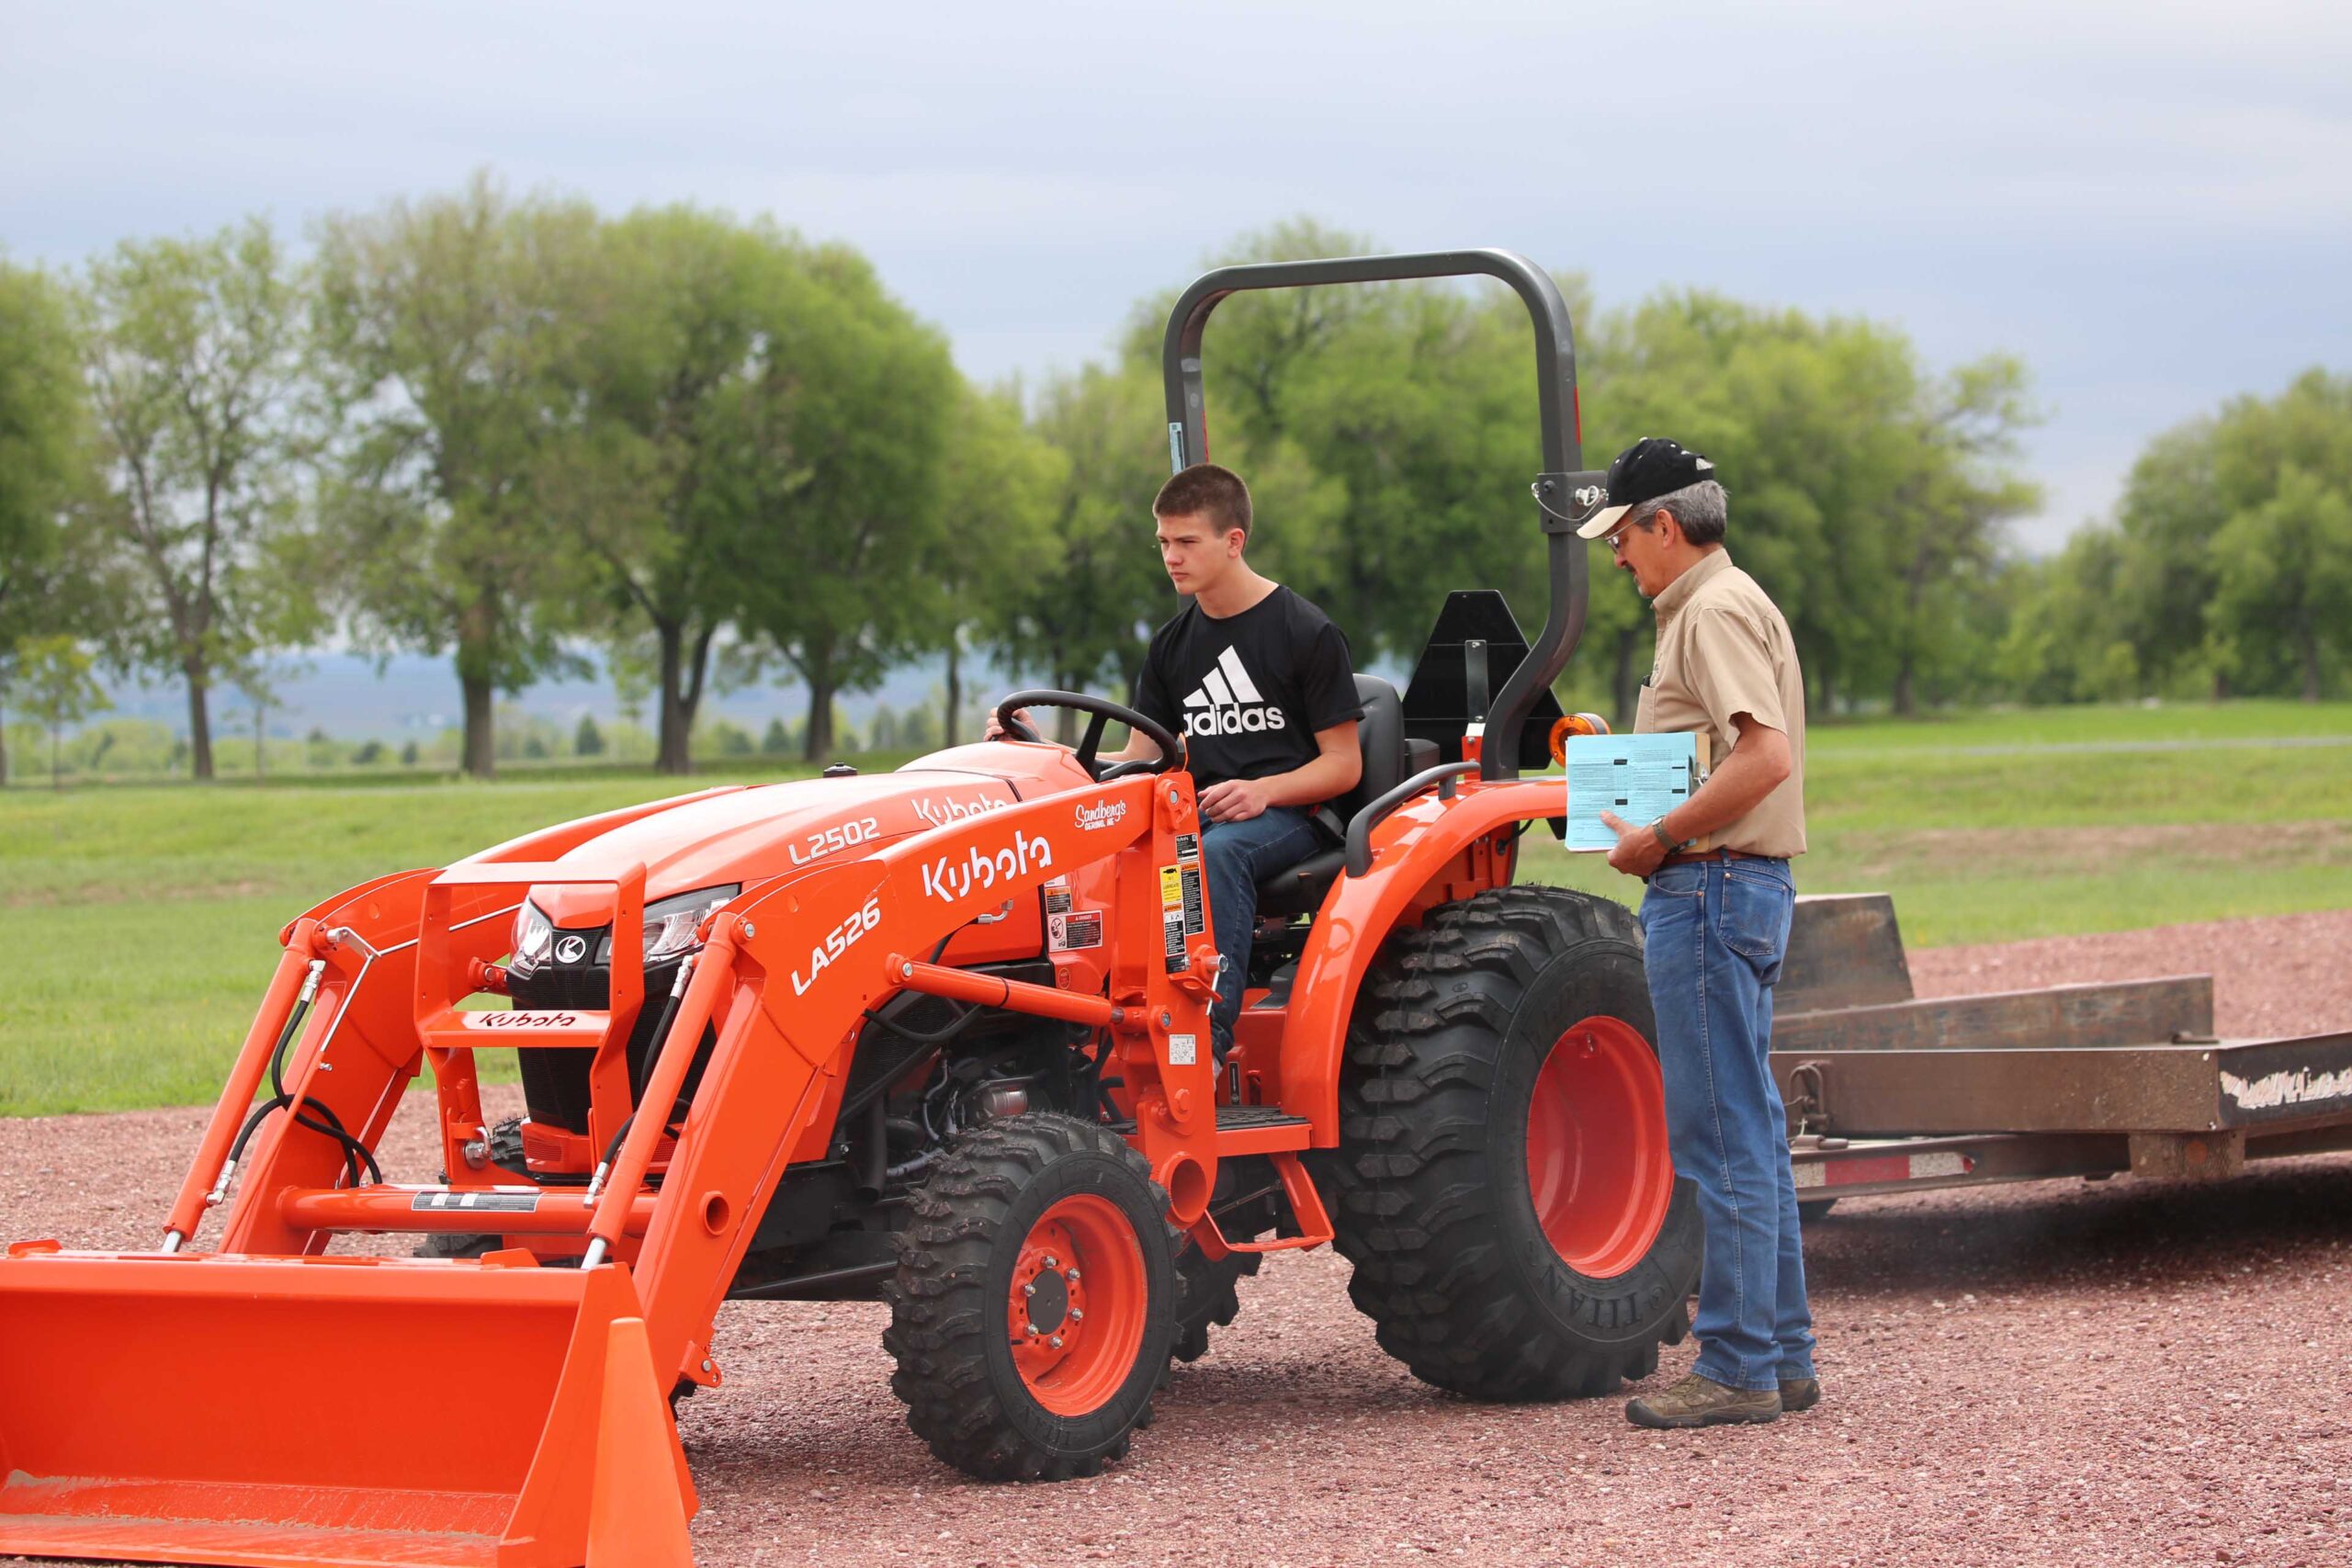 Certification received through this course grants an exemption to the law allowing 14- and 15-year-olds to drive a tractor and to do field work with certain mechanized equipment&period;